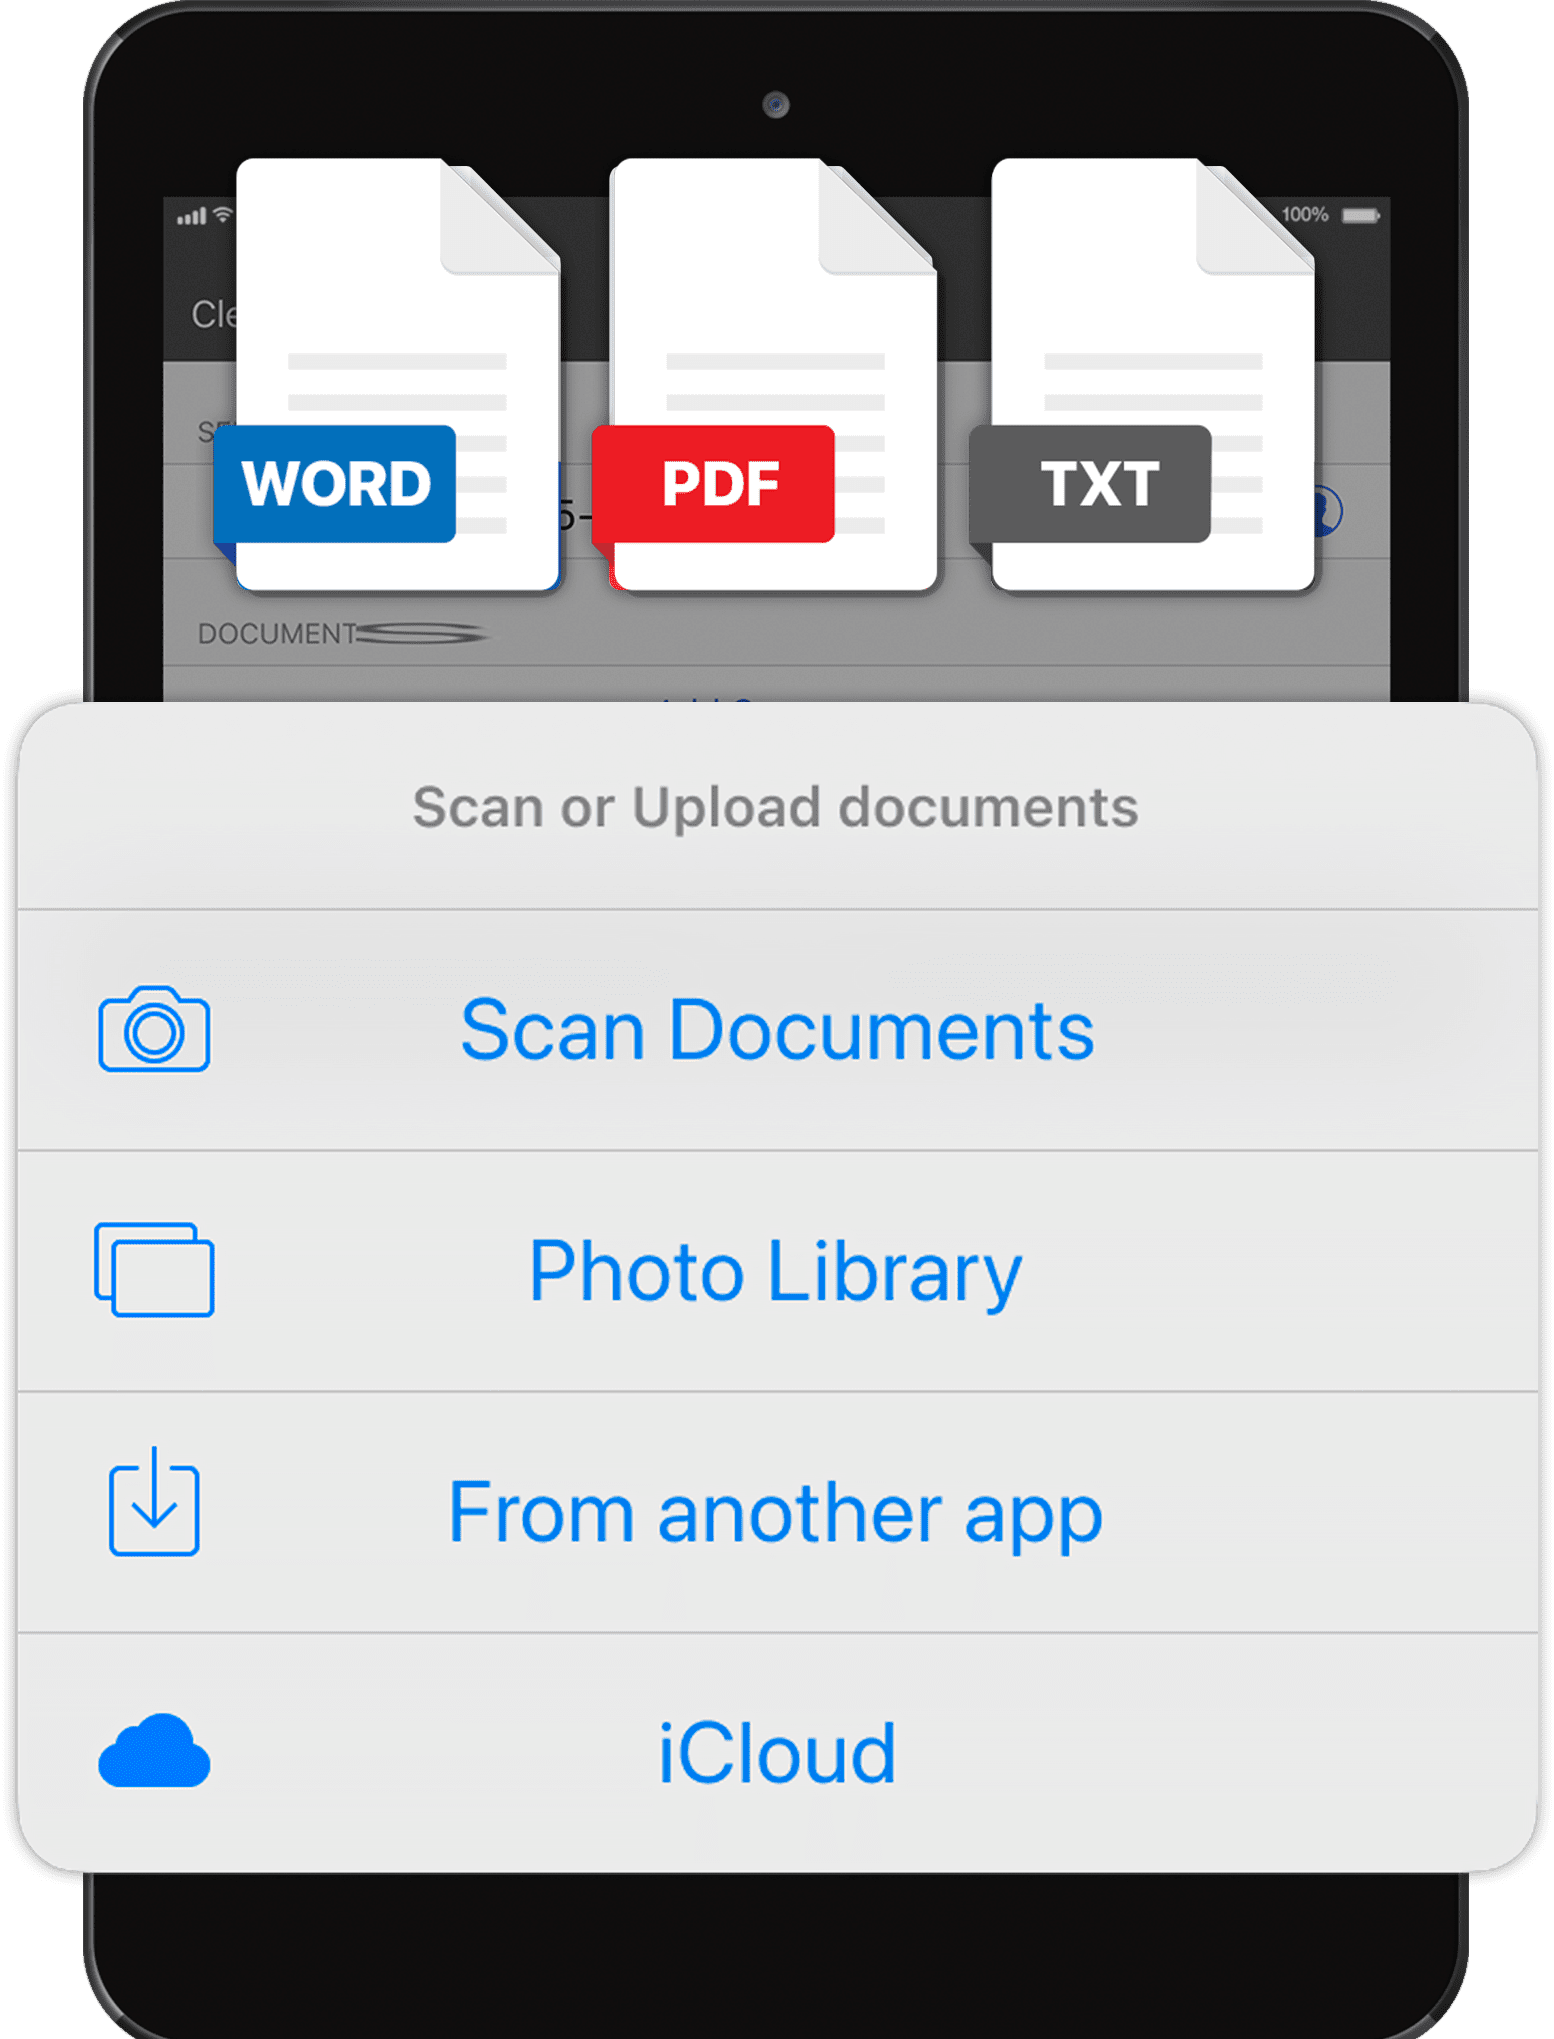 Upload a document or scan it with your ipad camera interface of the Fax App